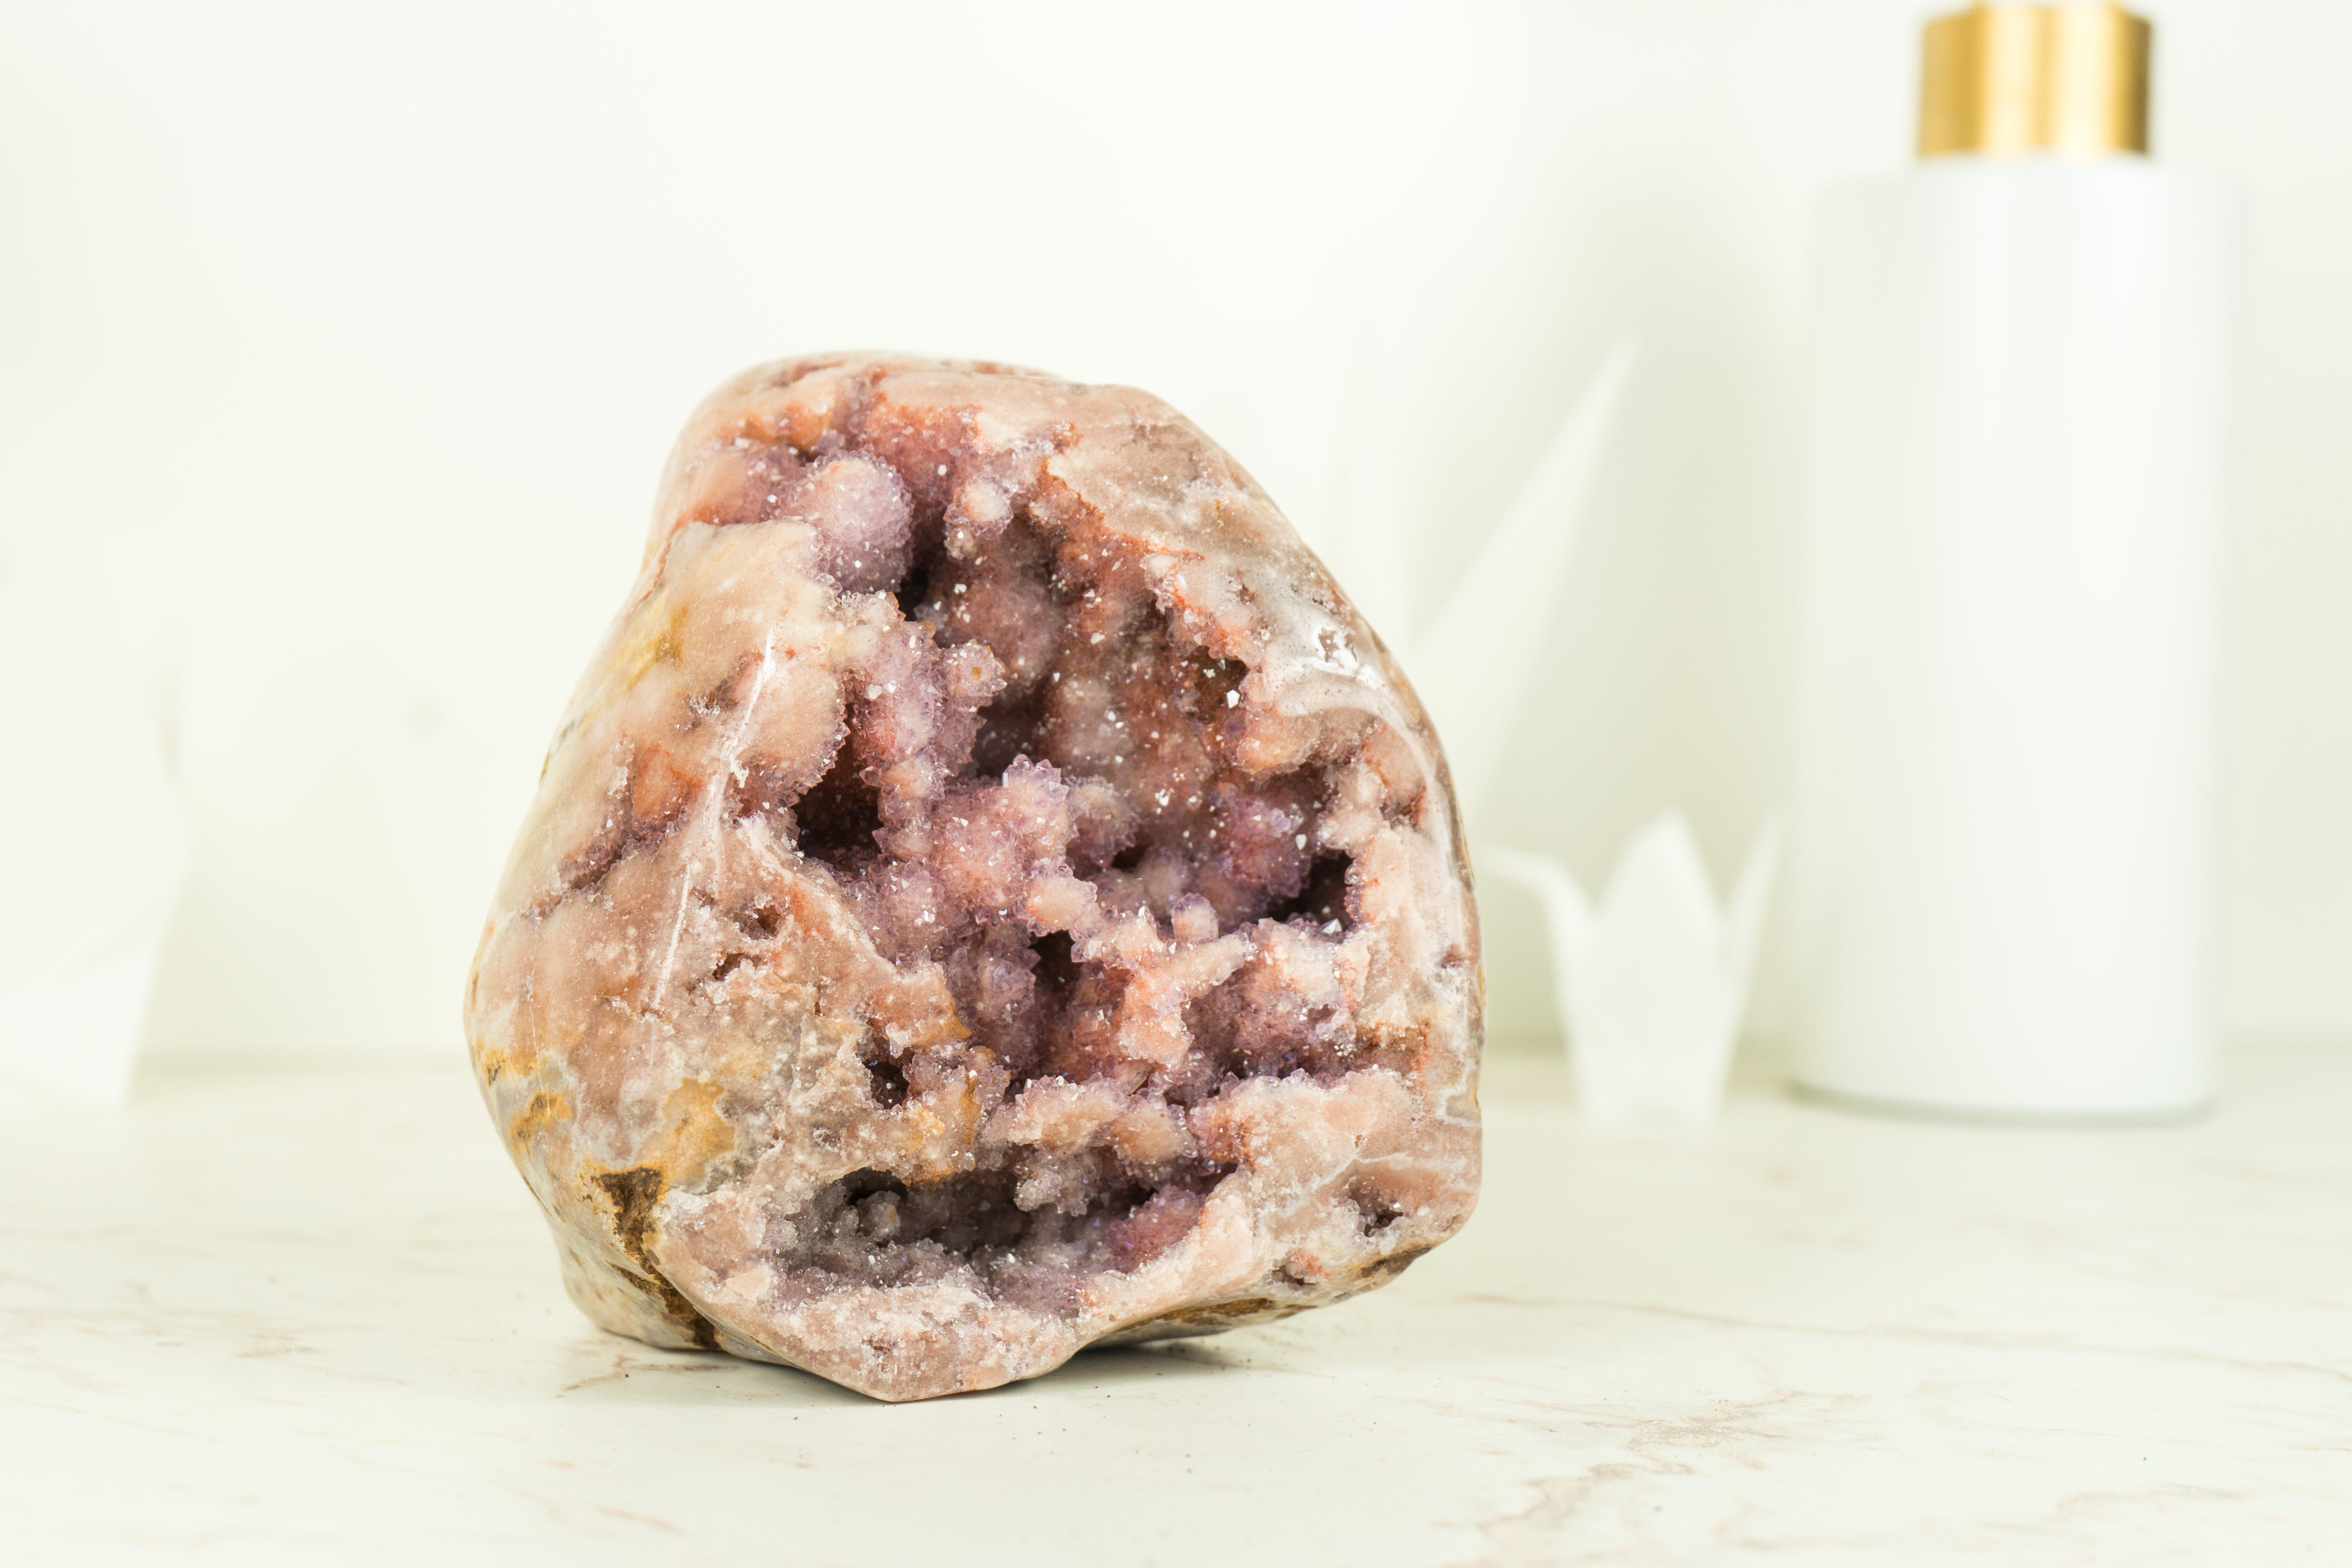 Nature's masterpiece at its finest, with gorgeous Pink Amethyst druzy this Pink Amethyst Geode boasts unparalleled beauty and quality, making it a magnificent addition to your collection or an exquisite centerpiece for your home decor.

With